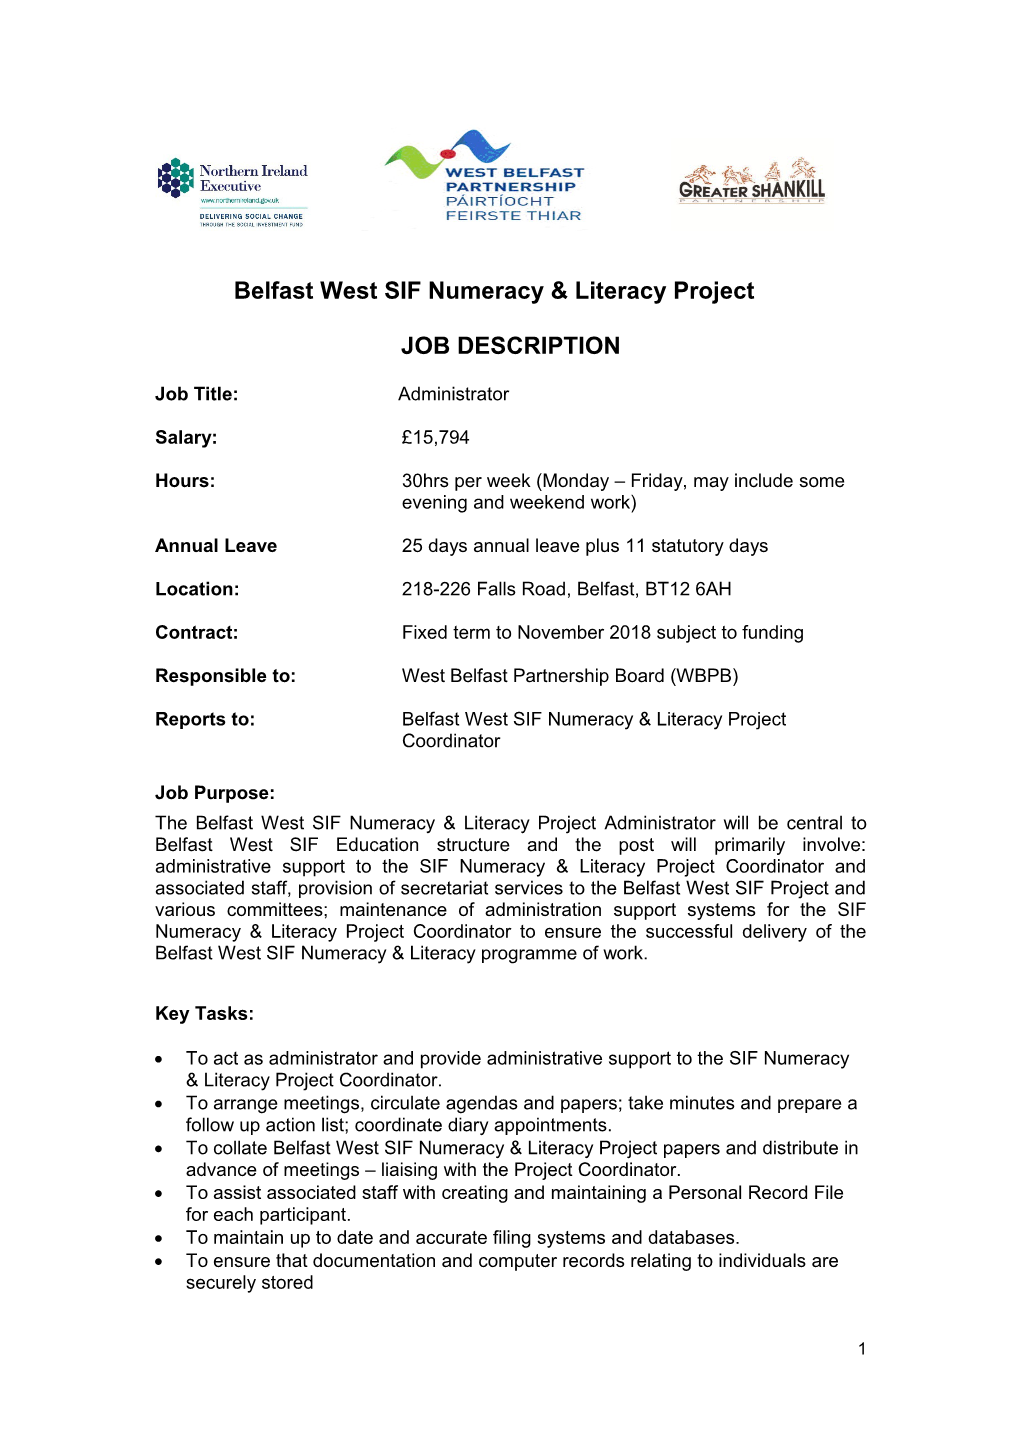 Belfast West SIF Numeracy & Literacy Project